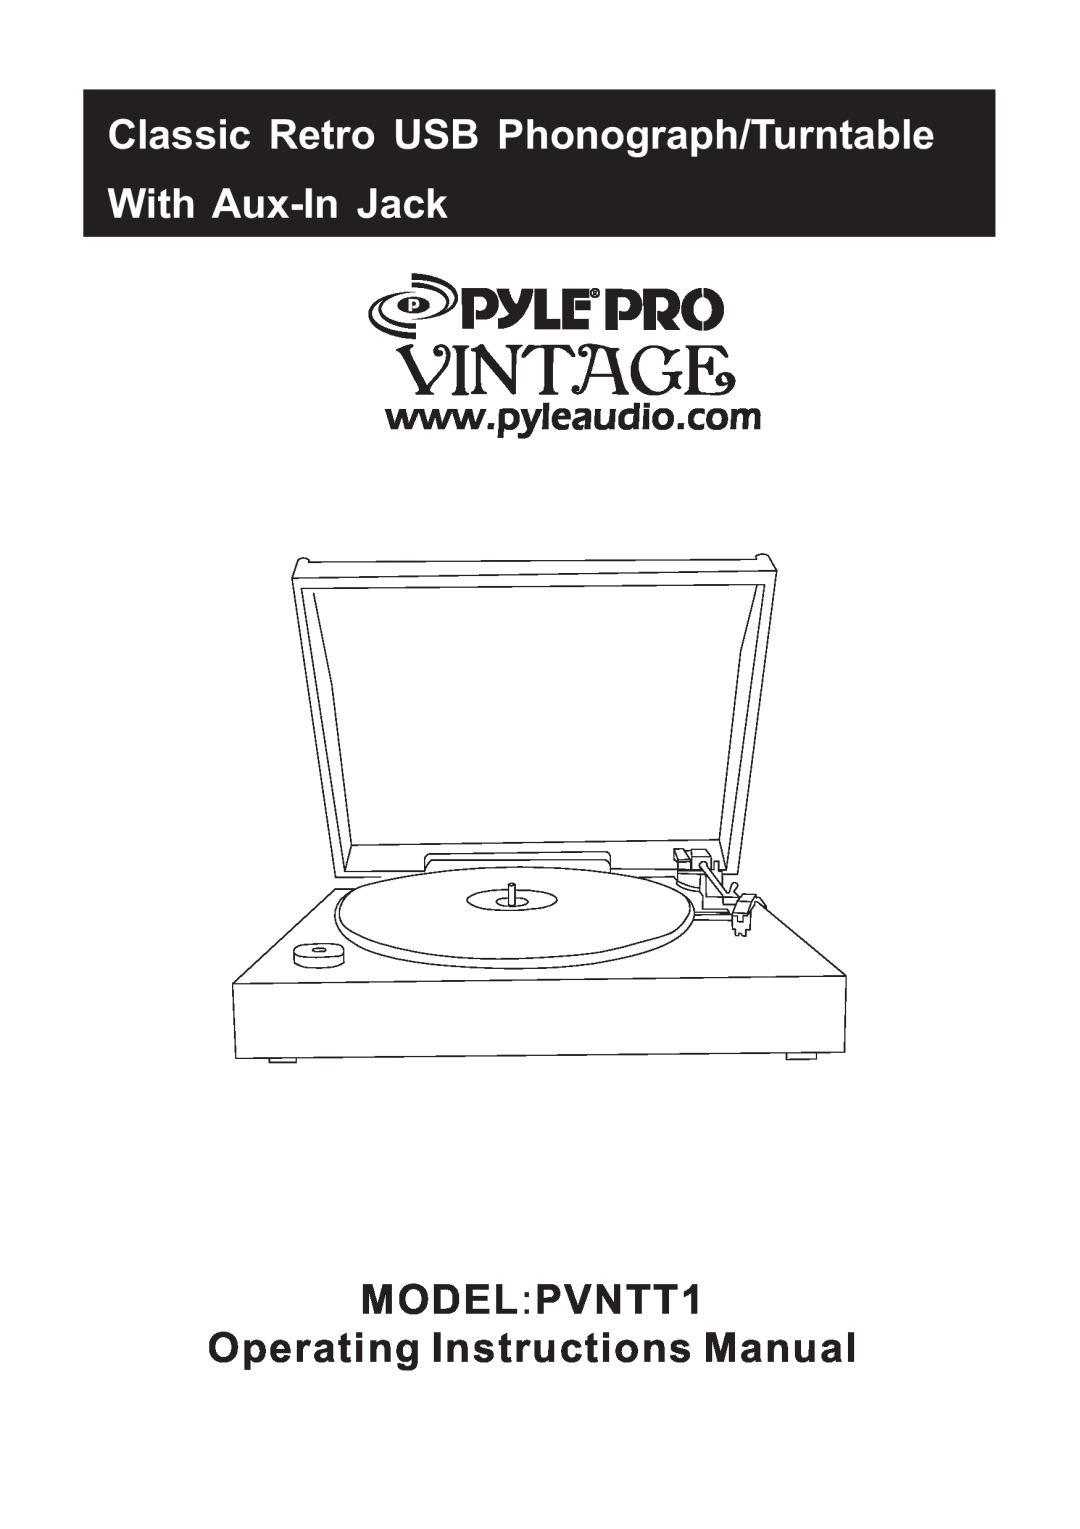 PYLE Audio PVNTT1 manual Classic Retro USB Phonograph/Turntable, With Aux-InJack 